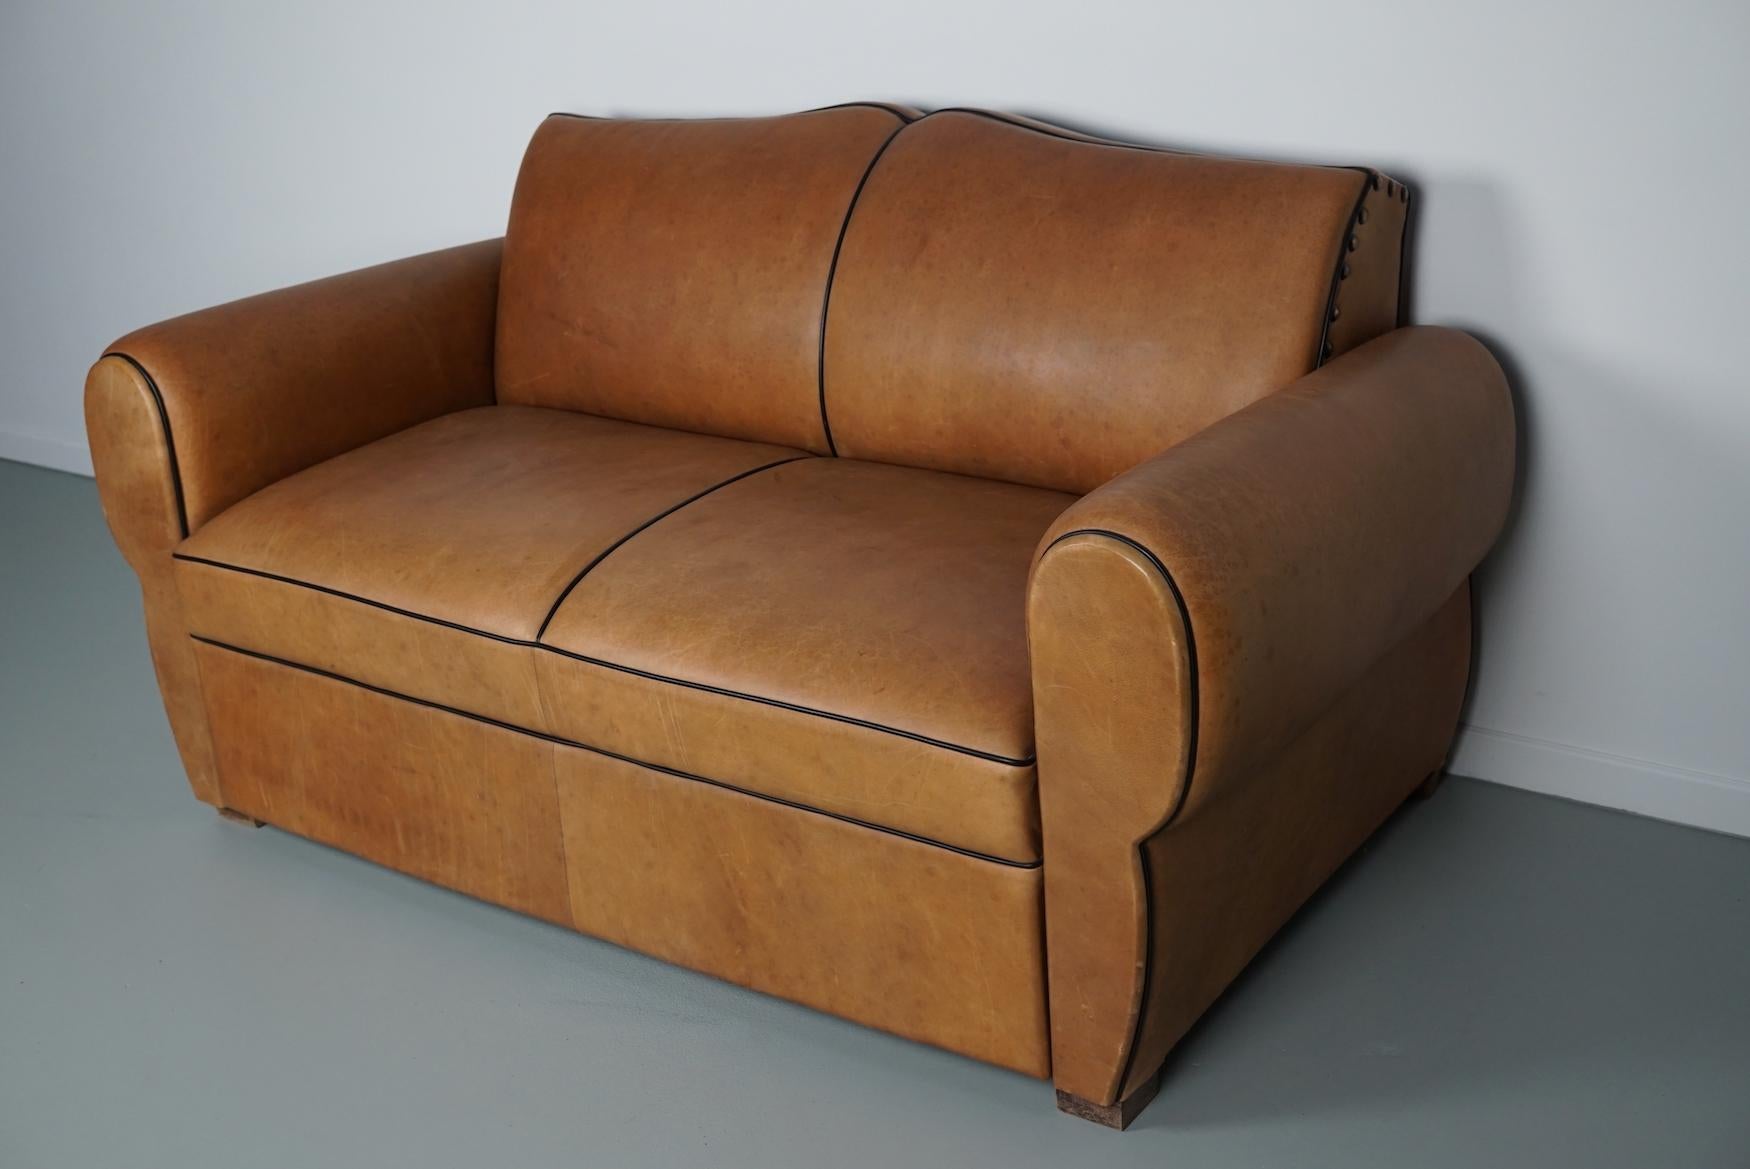 This moustache back club sofa was made around the 1940s in France. It was reupholstered some years ago with high quality cognac leather with black piping and the springs / foam was changed for a firmer seat.